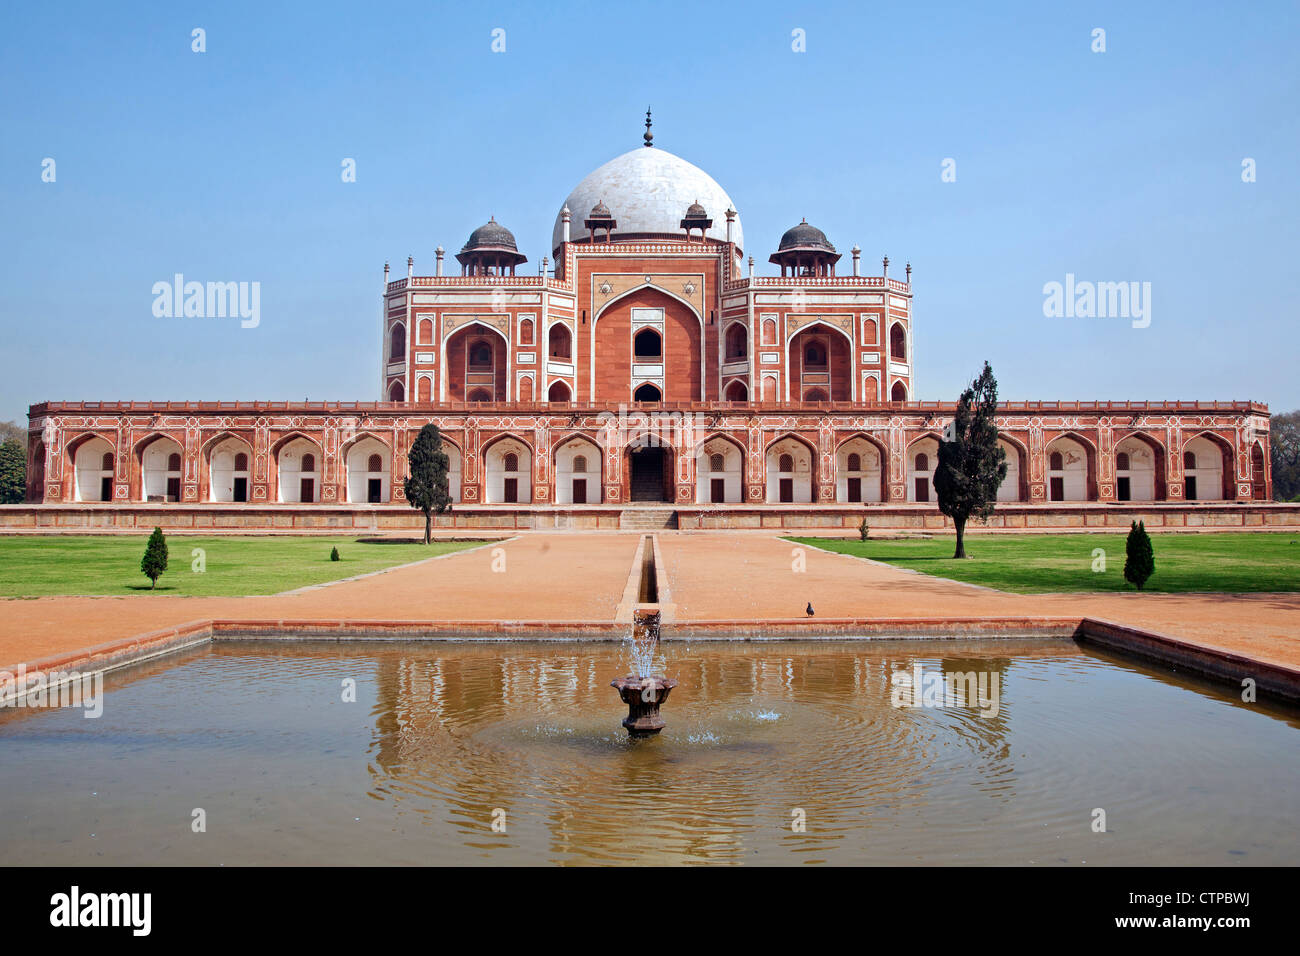 Fountain in the Charbagh Garden of the Tomb of Humayun in Delhi, India Stock Photo